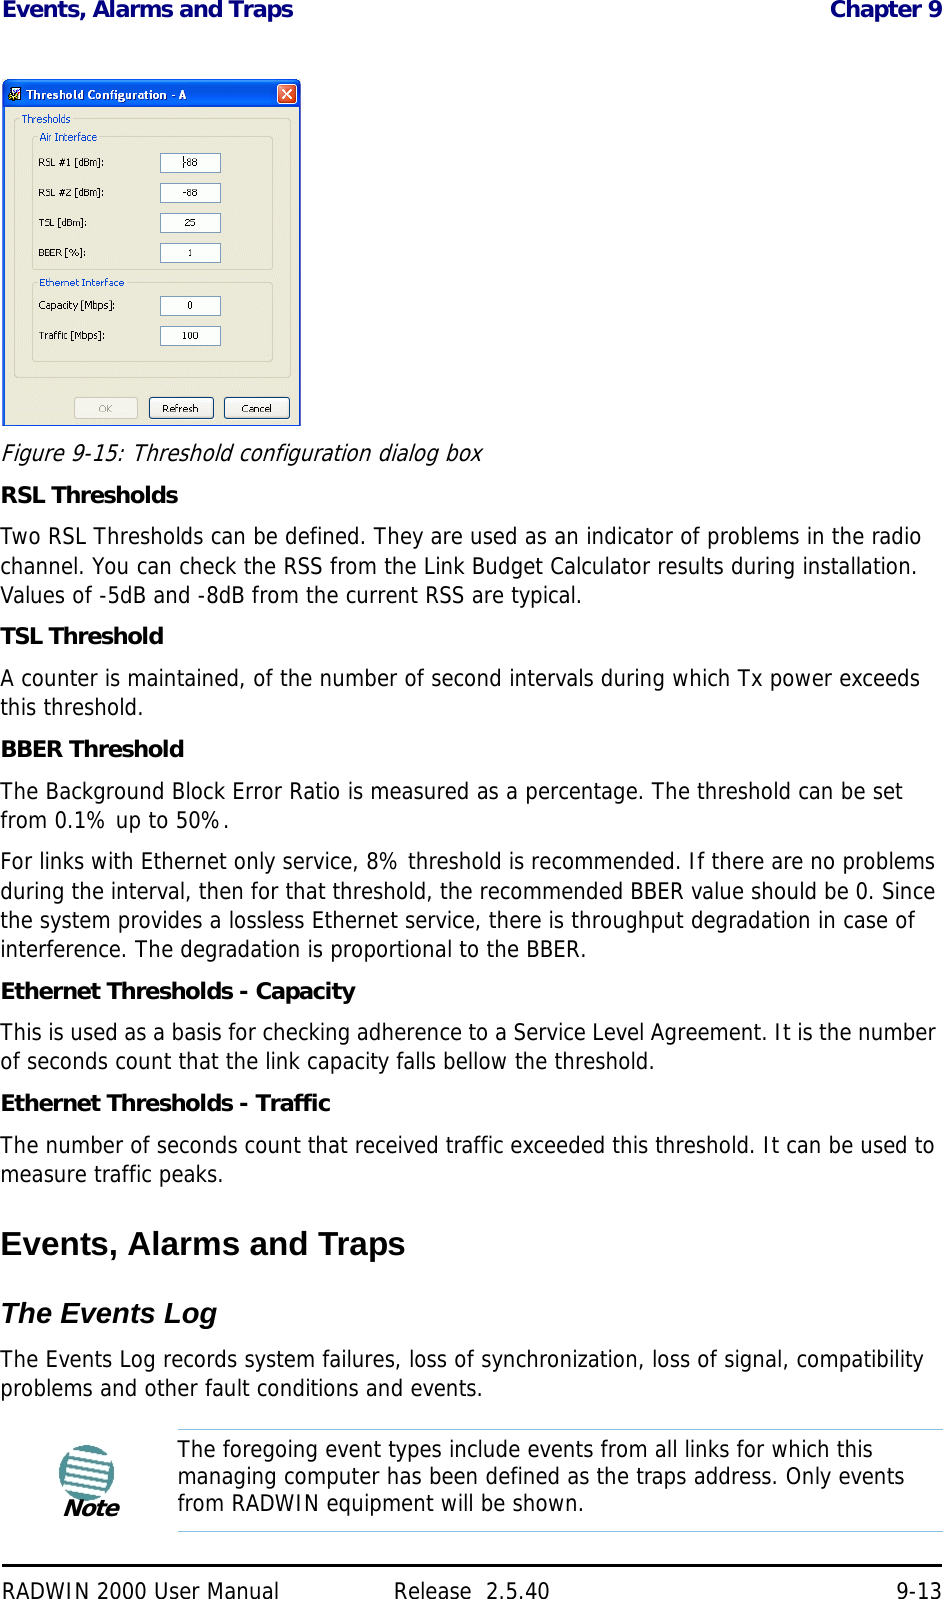 Events, Alarms and Traps Chapter 9RADWIN 2000 User Manual Release  2.5.40 9-13Figure 9-15: Threshold configuration dialog boxRSL ThresholdsTwo RSL Thresholds can be defined. They are used as an indicator of problems in the radio channel. You can check the RSS from the Link Budget Calculator results during installation. Values of -5dB and -8dB from the current RSS are typical.TSL ThresholdA counter is maintained, of the number of second intervals during which Tx power exceeds this threshold.BBER ThresholdThe Background Block Error Ratio is measured as a percentage. The threshold can be set from 0.1% up to 50%.For links with Ethernet only service, 8% threshold is recommended. If there are no problems during the interval, then for that threshold, the recommended BBER value should be 0. Since the system provides a lossless Ethernet service, there is throughput degradation in case of interference. The degradation is proportional to the BBER.Ethernet Thresholds - CapacityThis is used as a basis for checking adherence to a Service Level Agreement. It is the number of seconds count that the link capacity falls bellow the threshold.Ethernet Thresholds - TrafficThe number of seconds count that received traffic exceeded this threshold. It can be used to measure traffic peaks.Events, Alarms and TrapsThe Events LogThe Events Log records system failures, loss of synchronization, loss of signal, compatibility problems and other fault conditions and events.NoteThe foregoing event types include events from all links for which this managing computer has been defined as the traps address. Only events from RADWIN equipment will be shown.